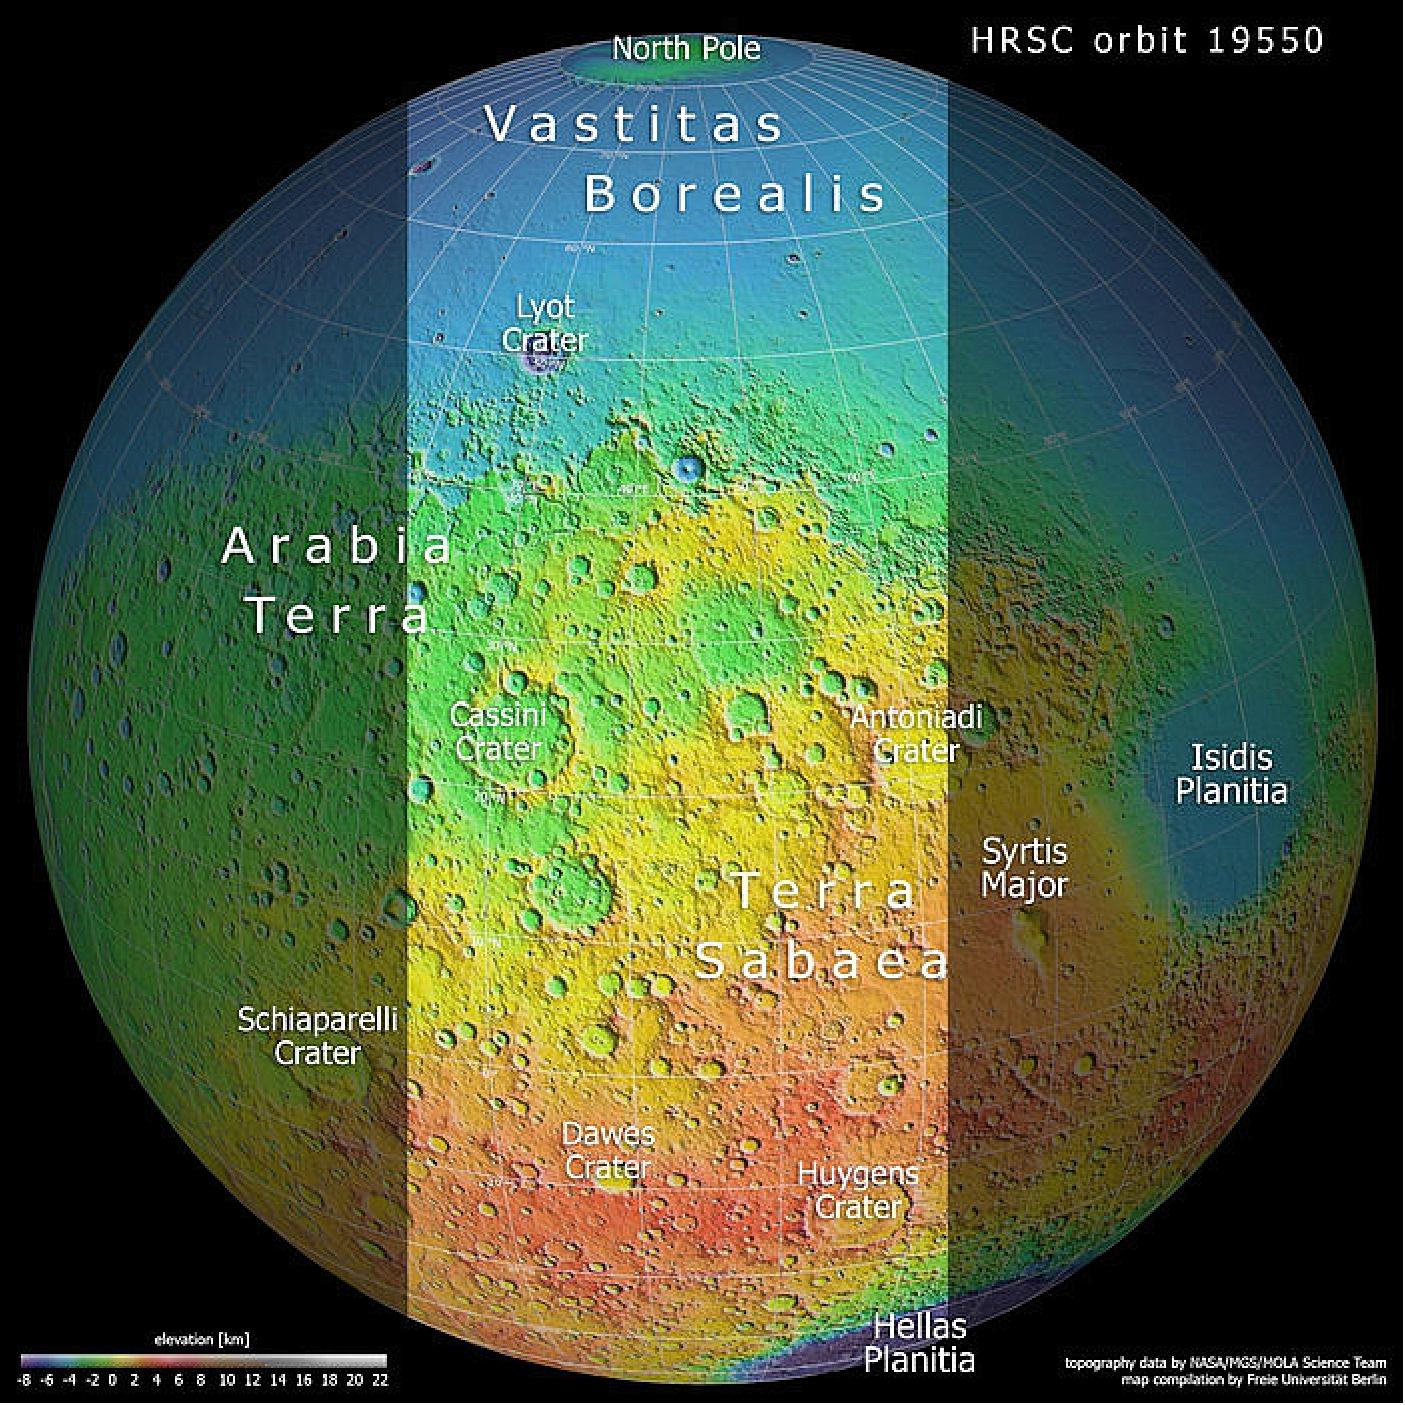 Figure 18: Topographic context. This color-coded topographic image shows a slice of the Red Planet from the northern polar cap downwards, and highlights cratered, pockmarked swathes of the Terra Sabaea and Arabia Terra regions. The area outlined in the center of the image indicates the area imaged by the Mars Express High Resolution Stereo Camera on 17 June 2019 during orbit 19550. This context map is based on data gathered by NASA's Viking and Mars Global Surveyor missions; lower parts of the surface are shown in blues and purples, while higher altitude regions show up in whites, yellows, and reds, as indicated on the scale to the bottom left (image credit: NASA/MGS/MOLA Science Team, FU Berlin)